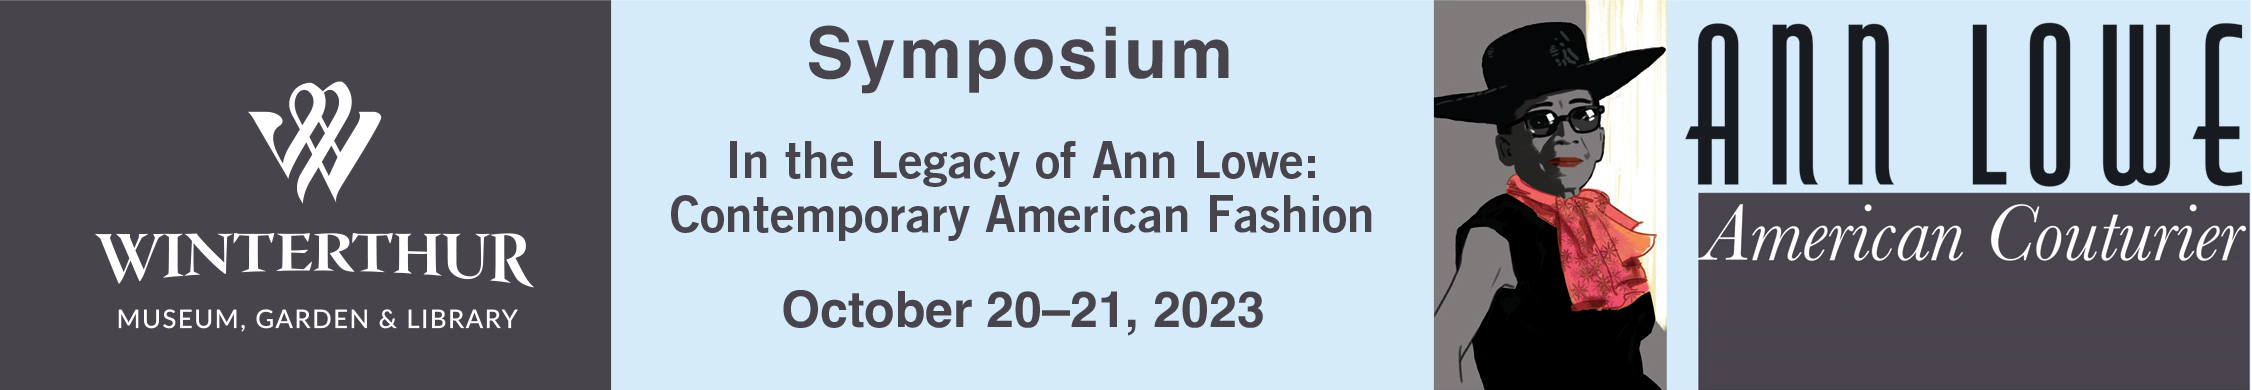 In the Legacy of Ann Lowe: Contemporary American Fashion Symposium